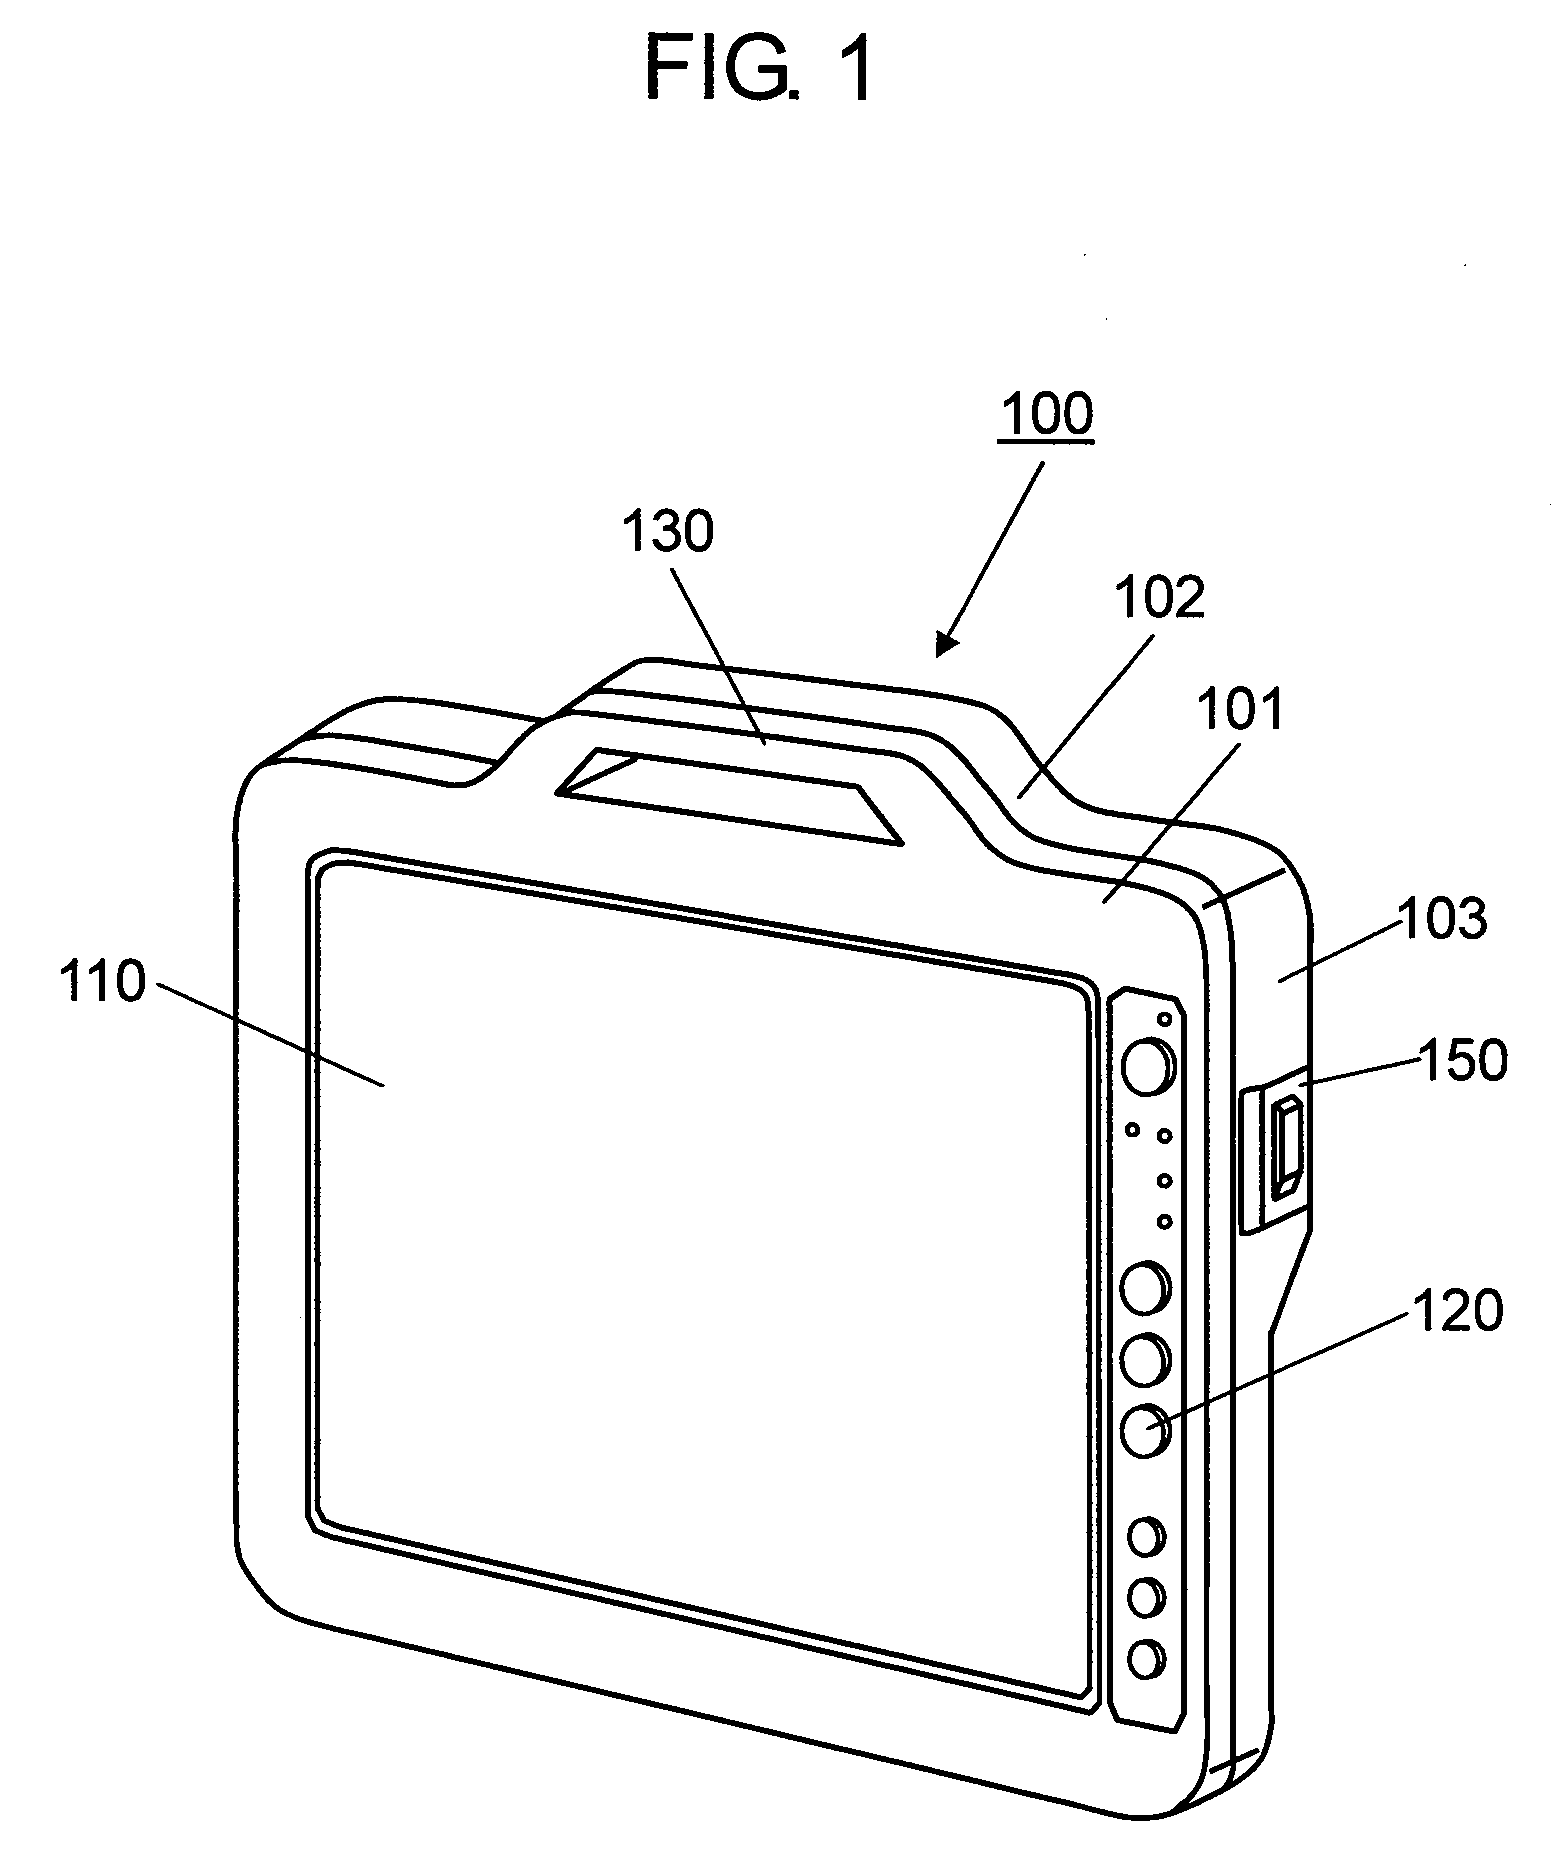 Lid member and electronic device using the same